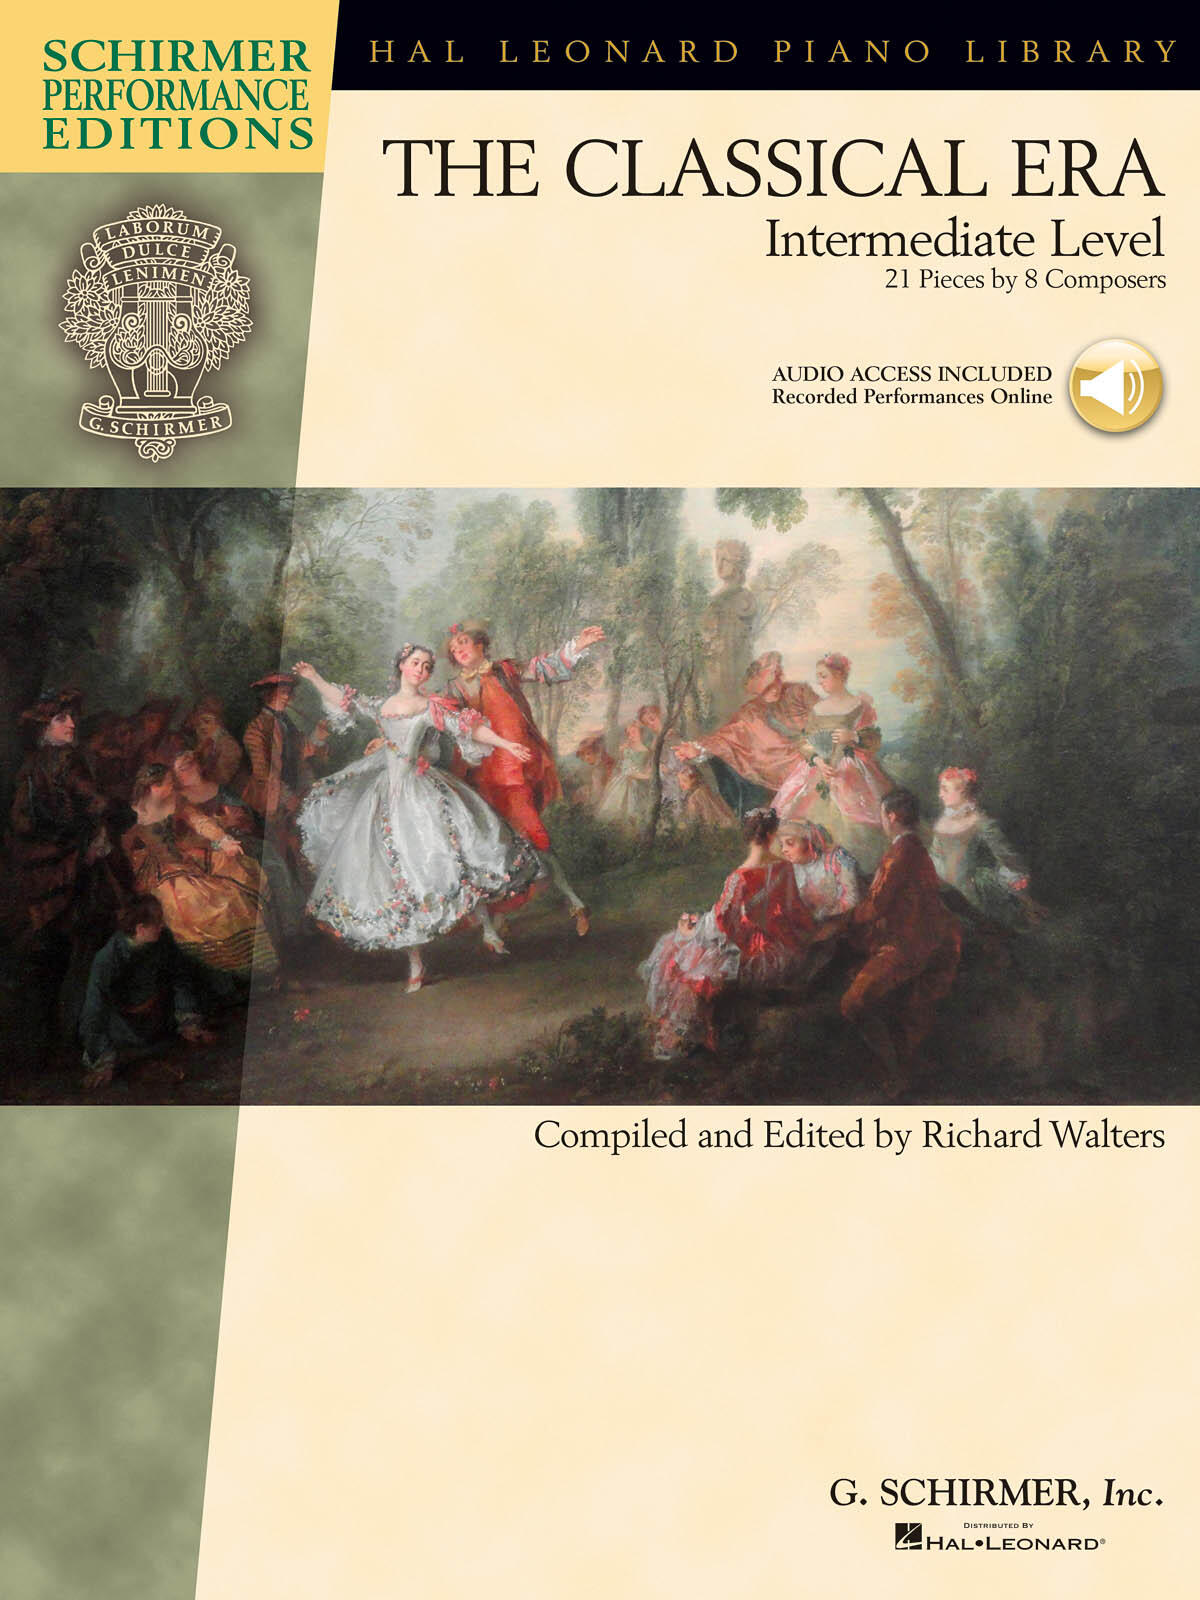 The Classical Era Intermediate Level - 21 Pieces by 8 Composers : photo 1